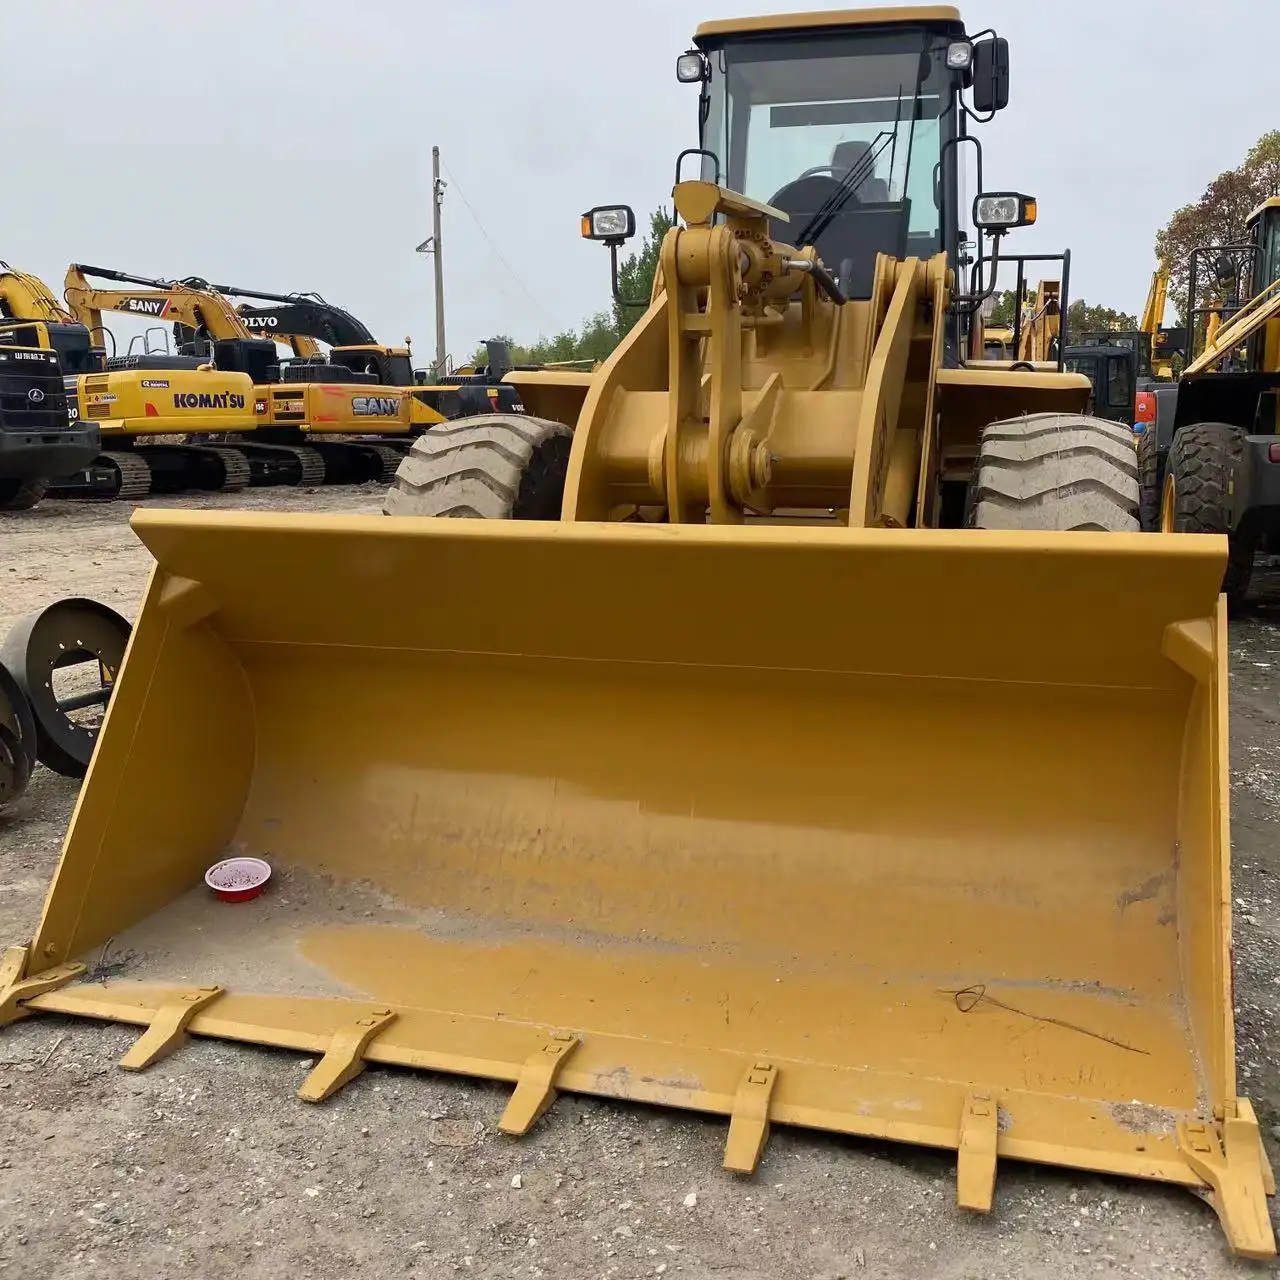 sold in anhui used CAT 966H 966 Loader For Sale construction machine heavy equipment 6 ton 966H Caterpillar